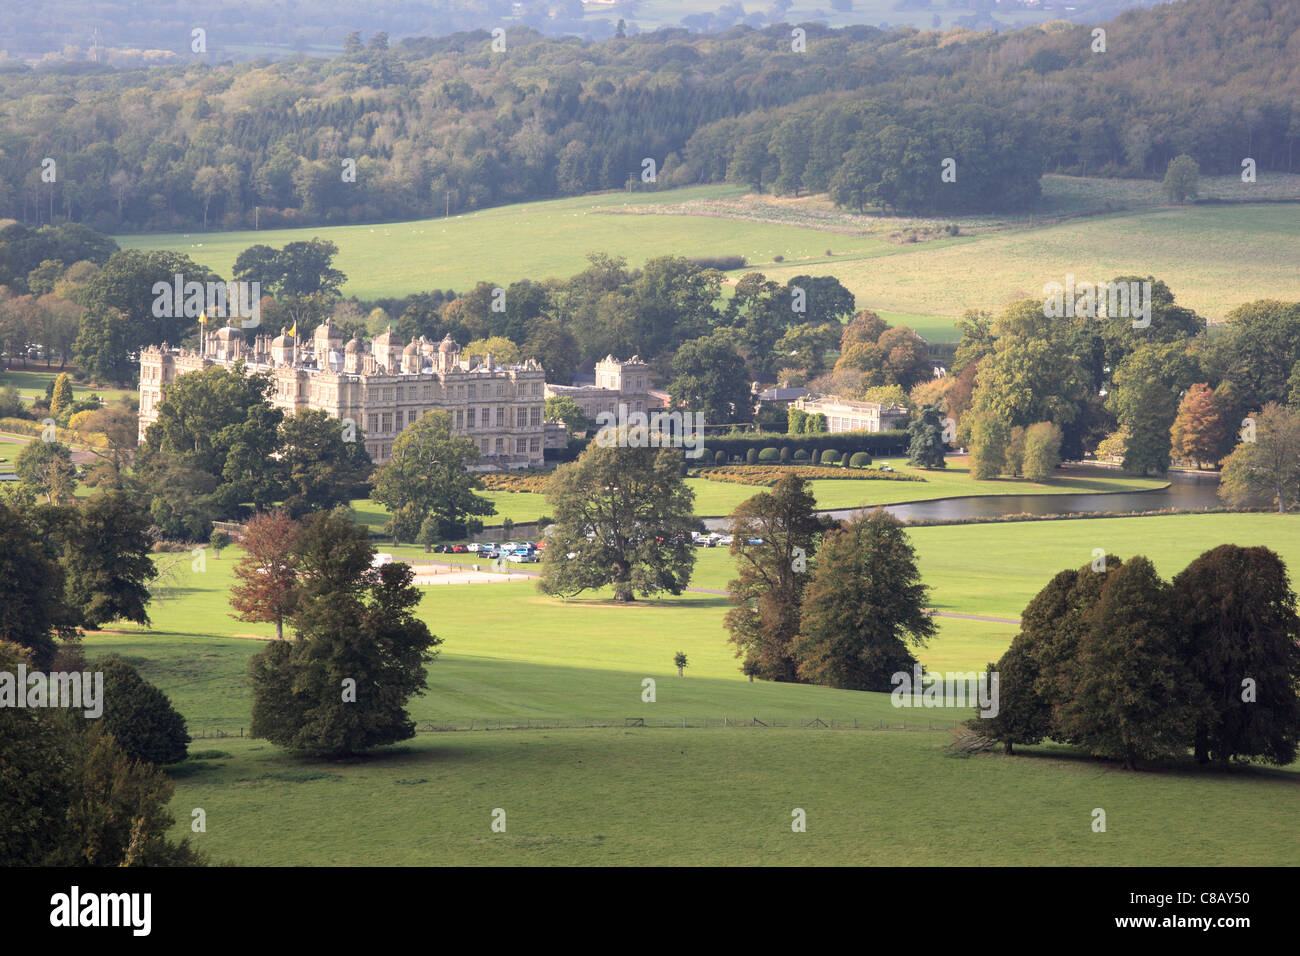 View from Heavens Gate towards Longleat House, Warminster, Wiltshire, England, UK Stock Photo